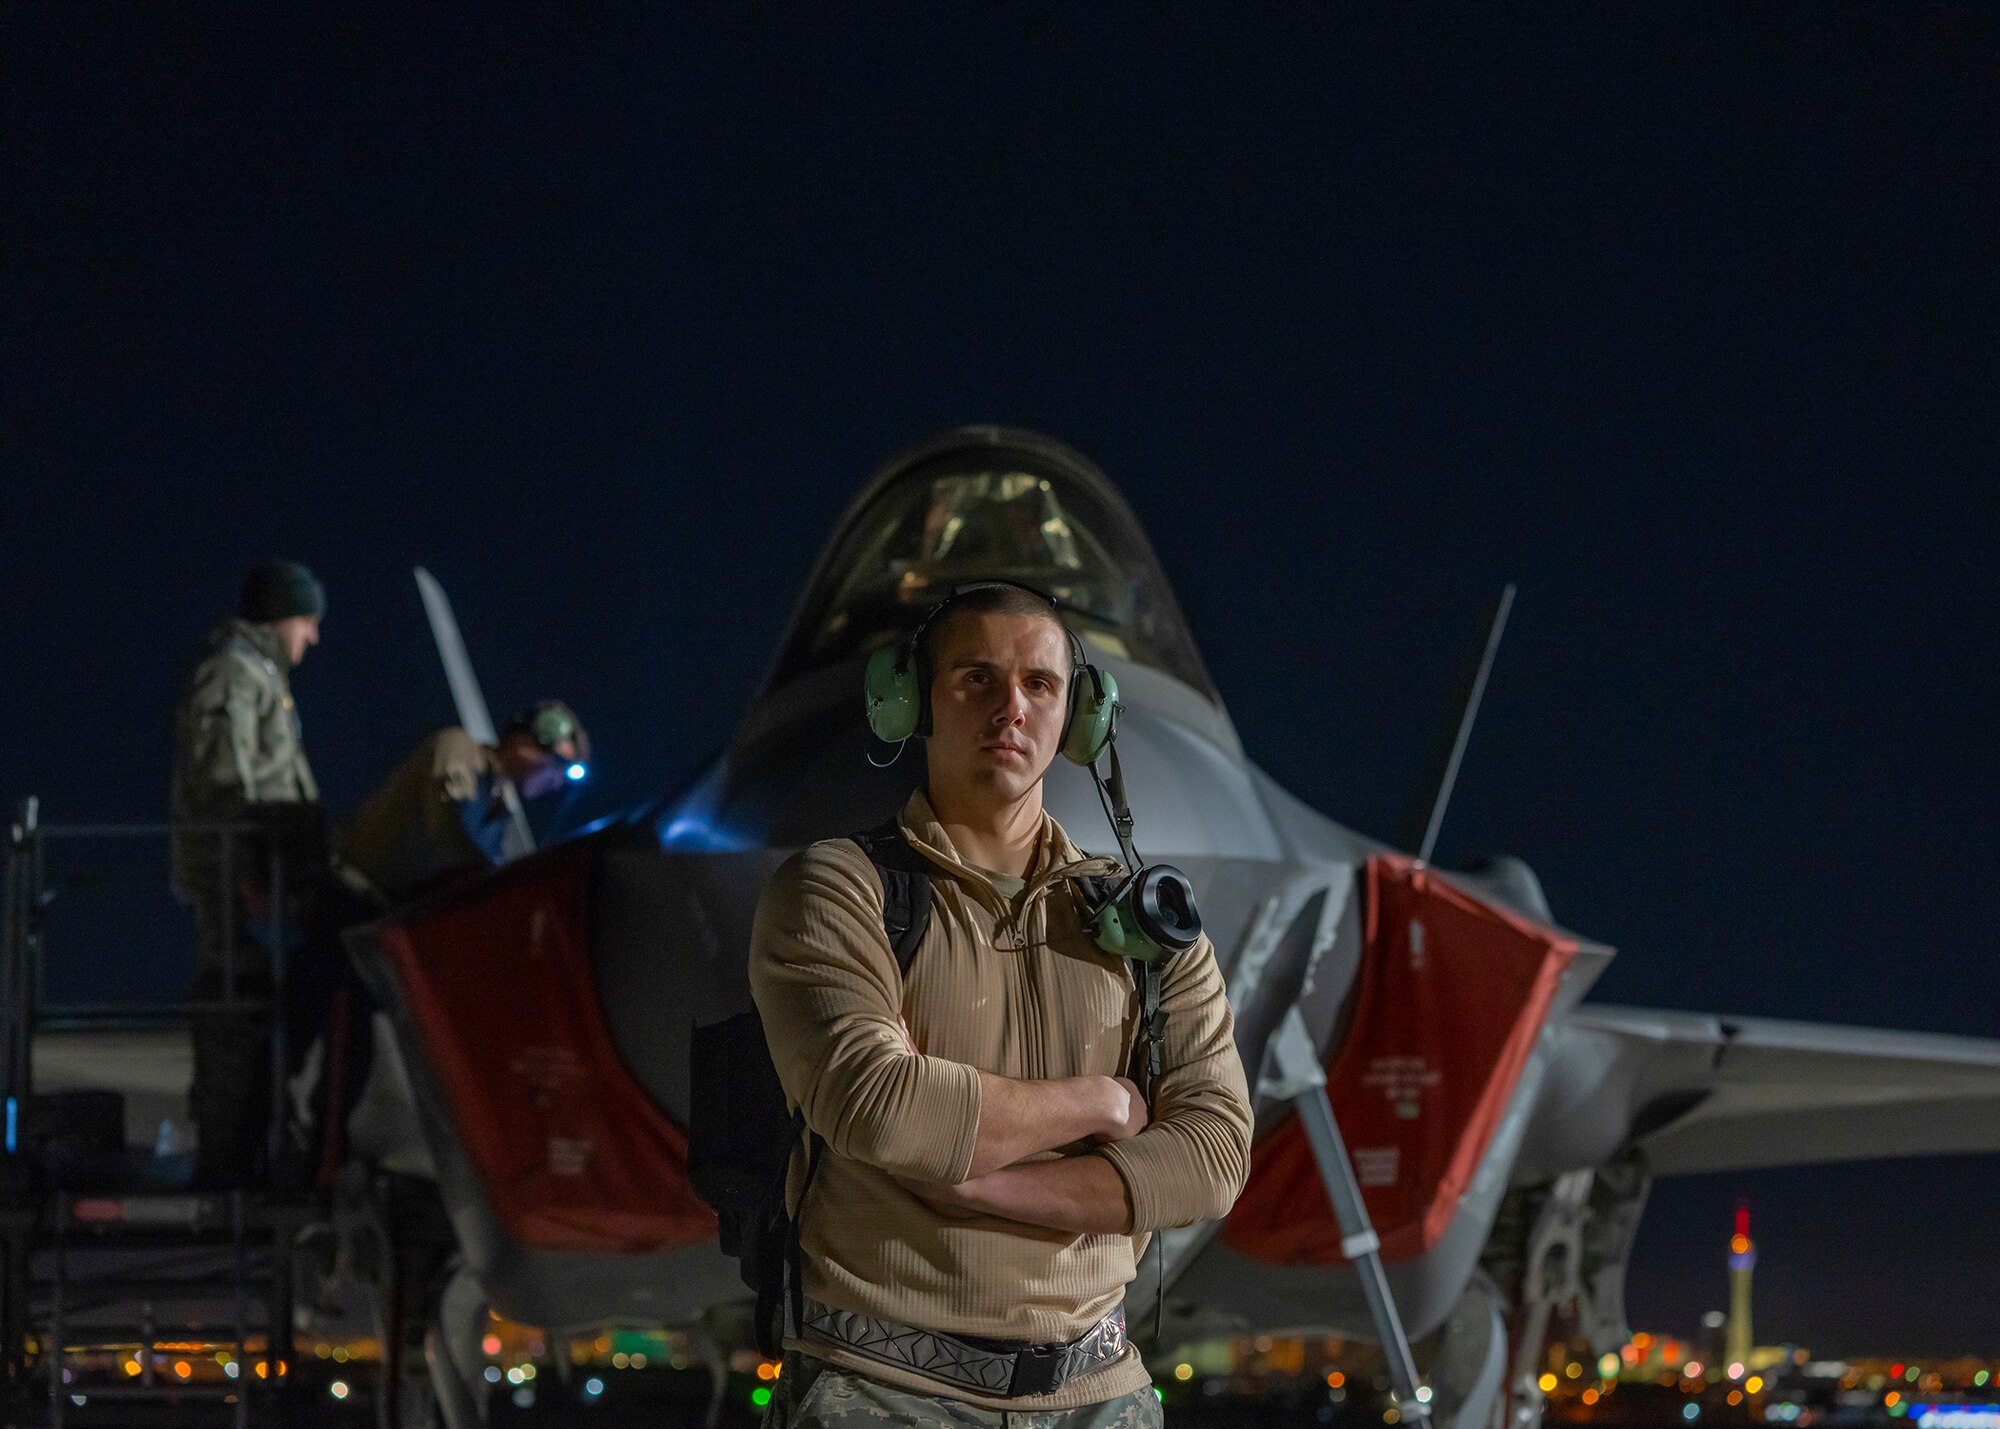 An Airman stands in front of an F-35A Lightning II fighter jet at night.